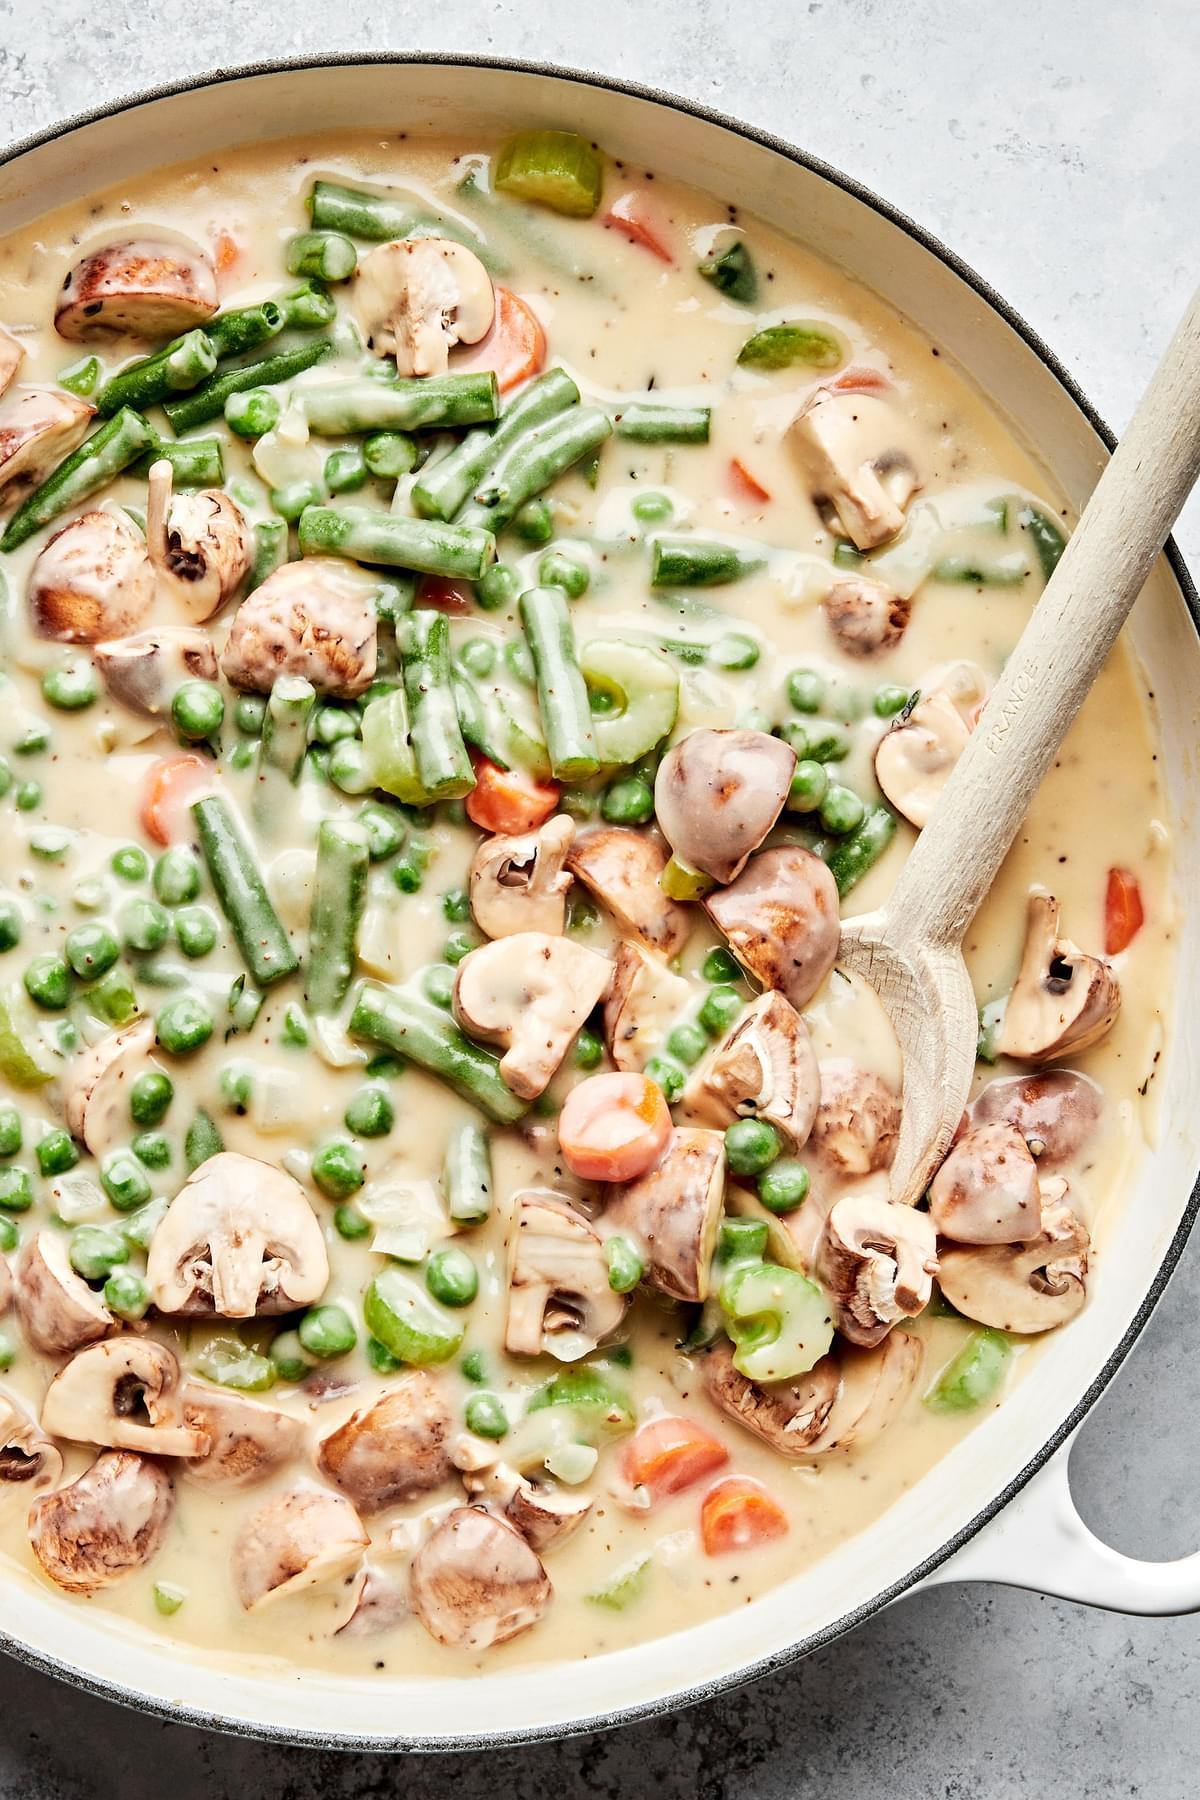 vegetable pot pie filling made with green beans, mushrooms and peas